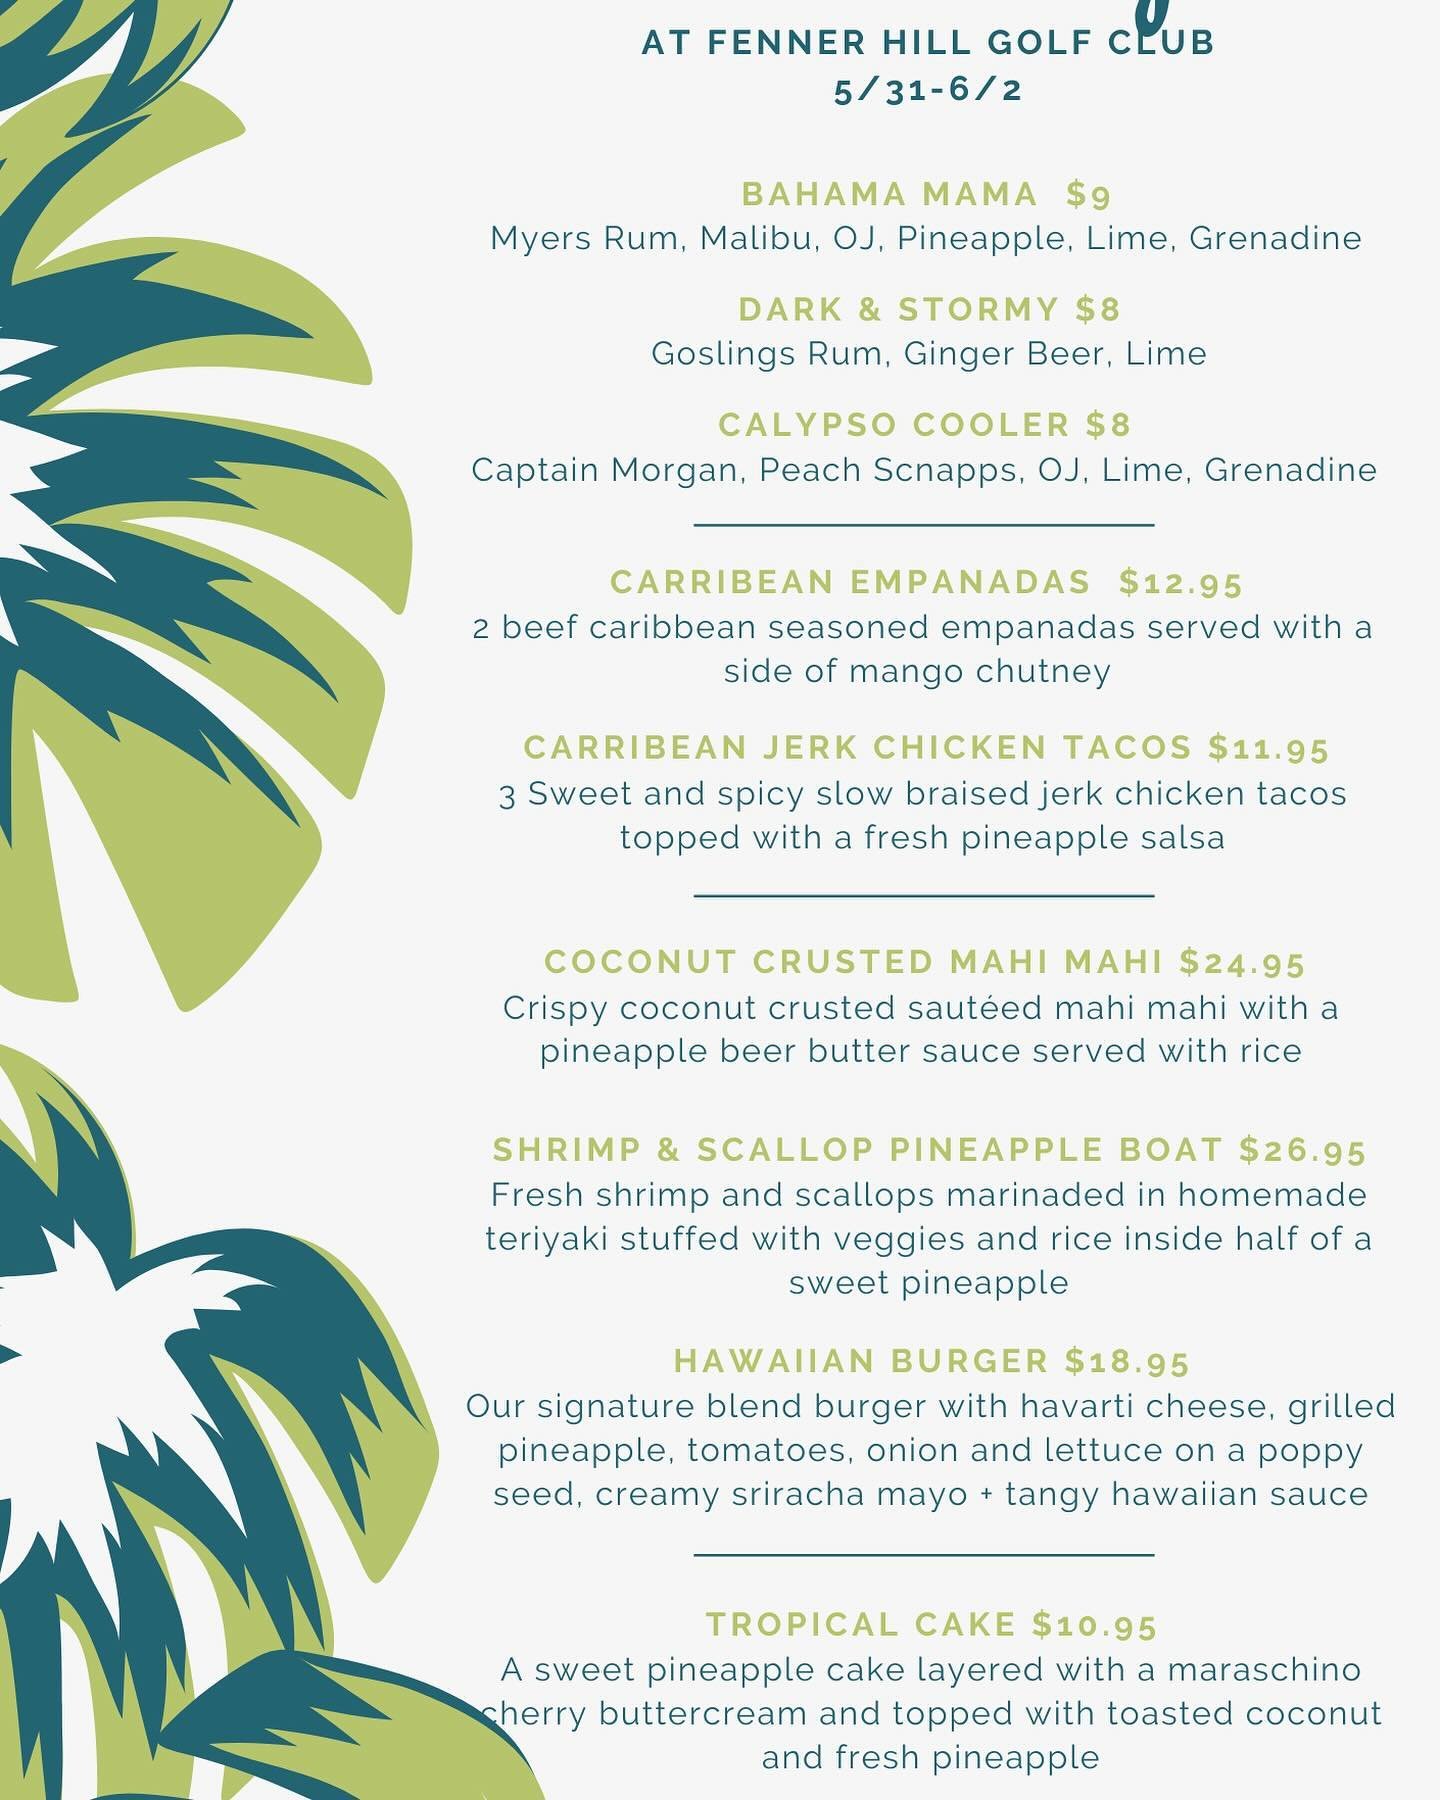 🍍We&rsquo;re visiting the tropics this week! 🍍

Come on down Friday-Sunday and join us for a little Caribbean treat for lunch or dinner!